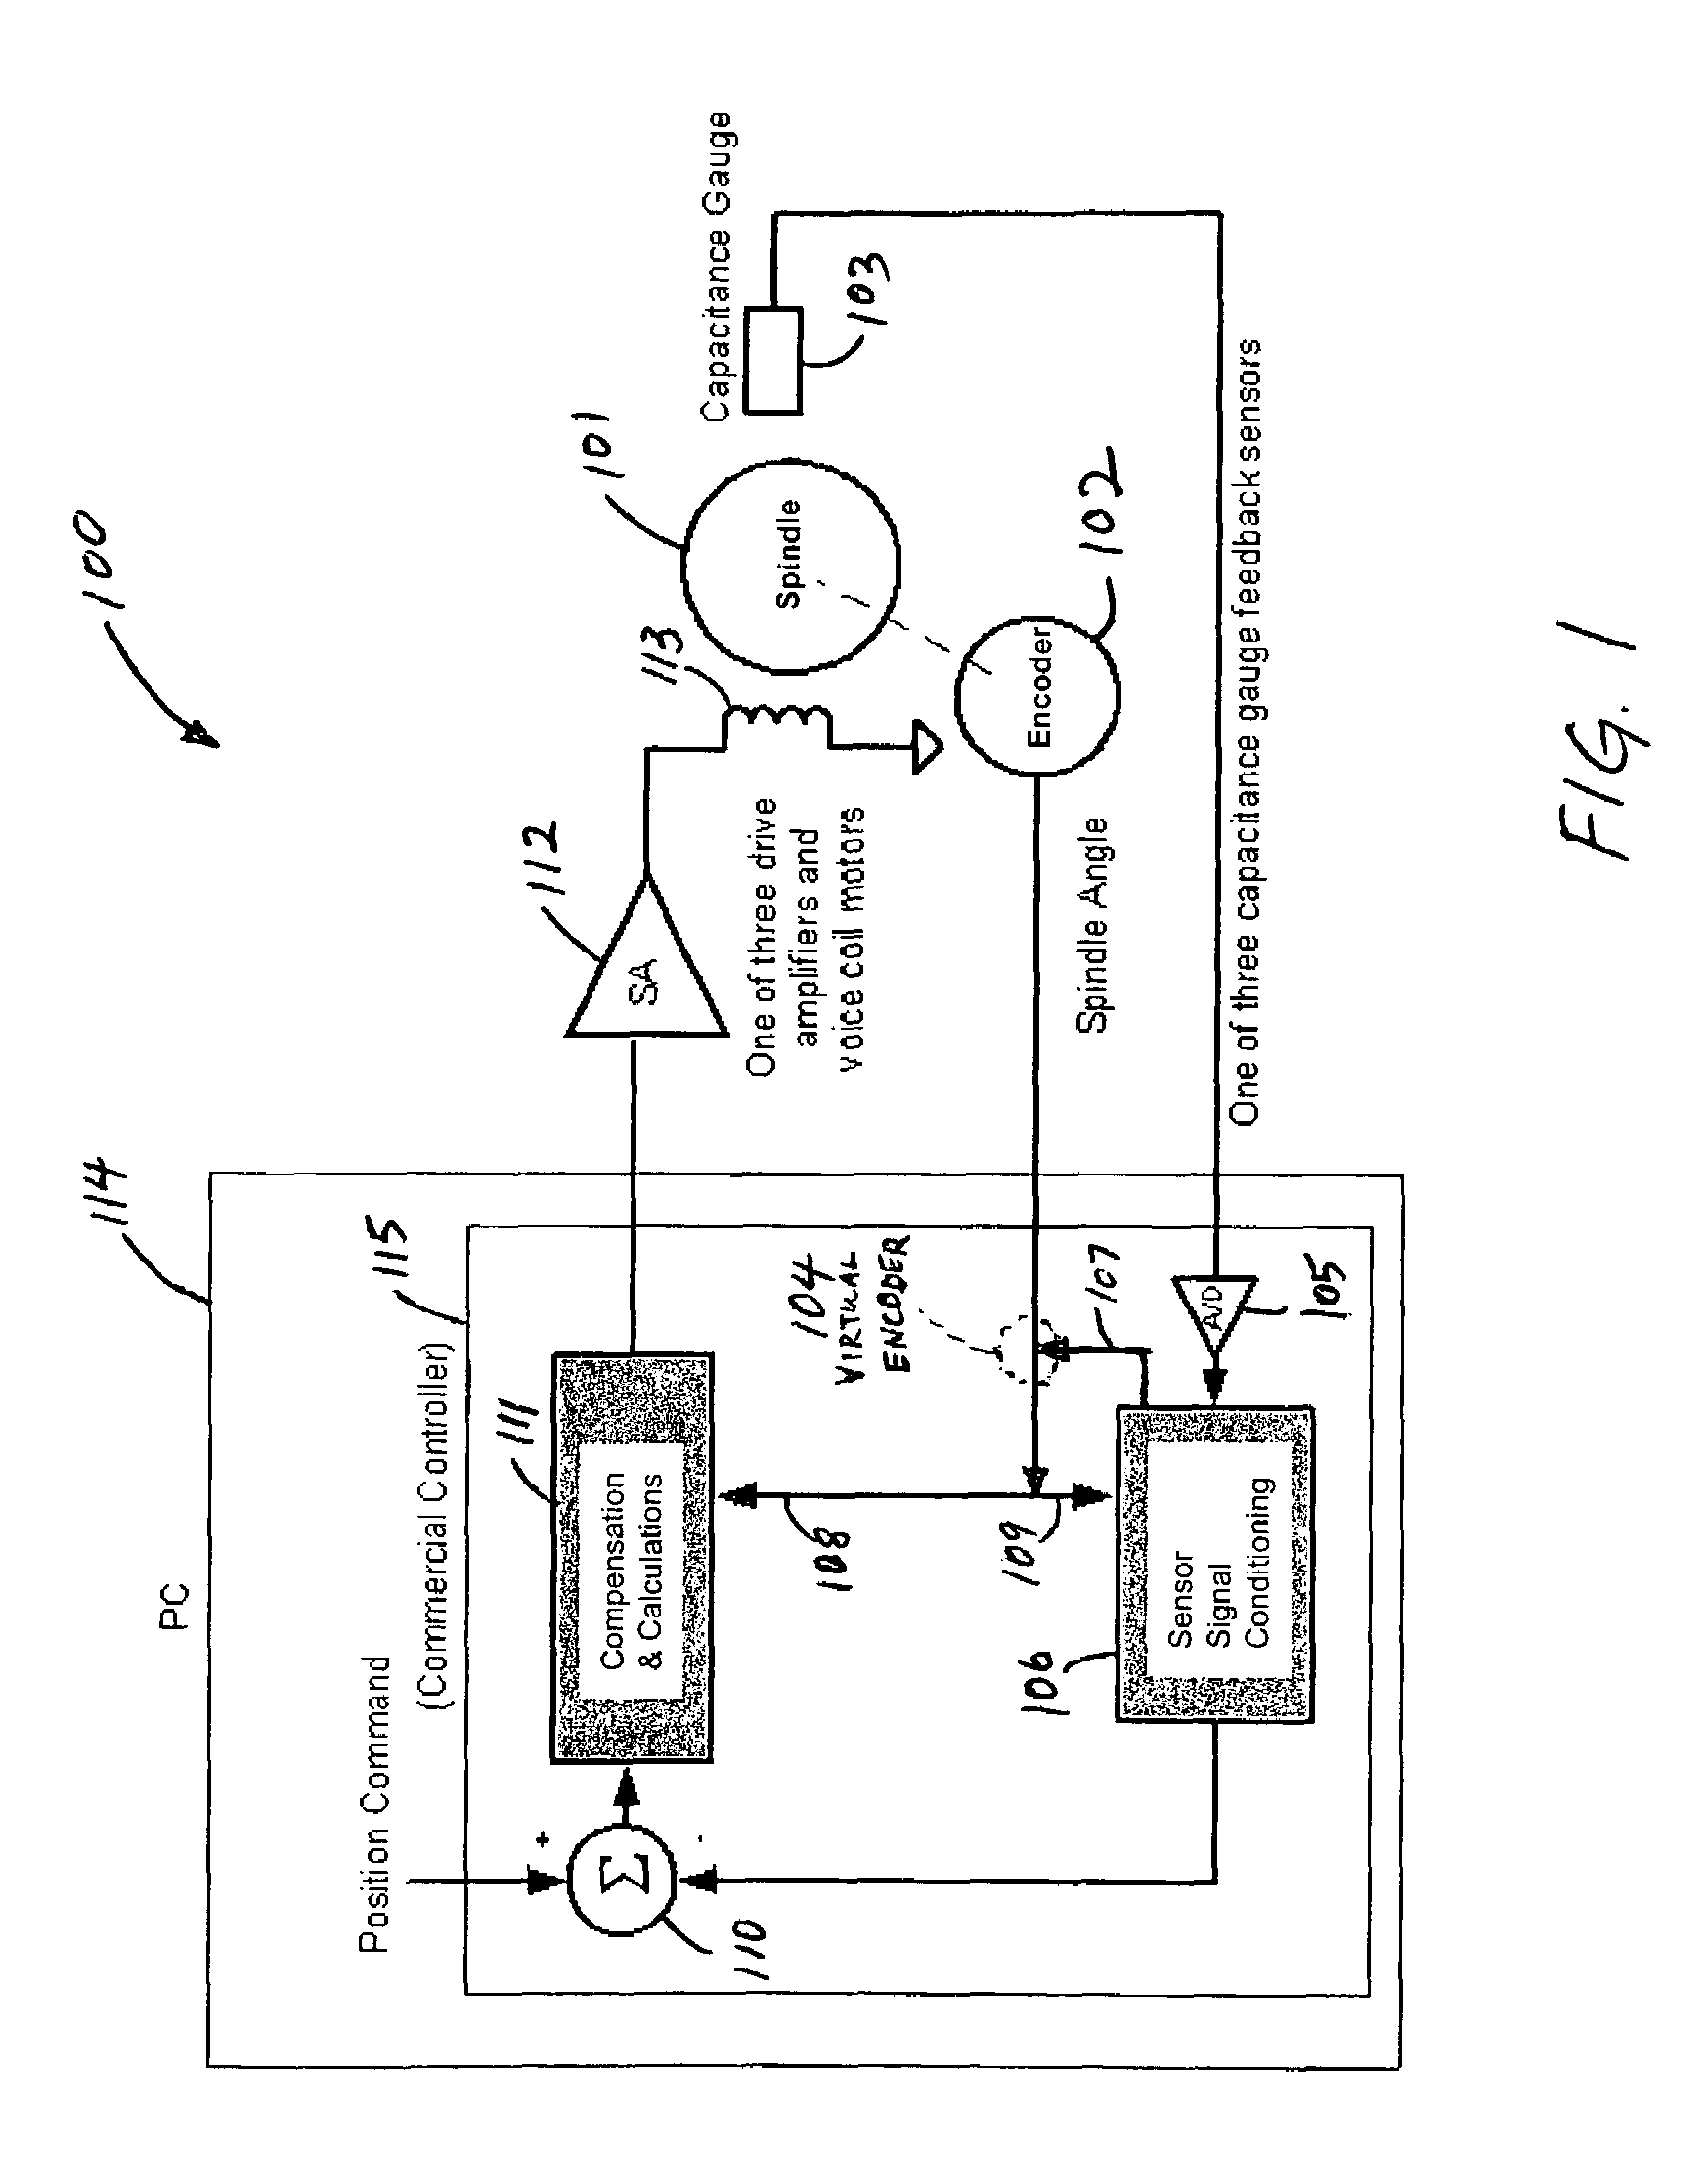 Adaptive vibration control using synchronous demodulation with machine tool controller motor commutation